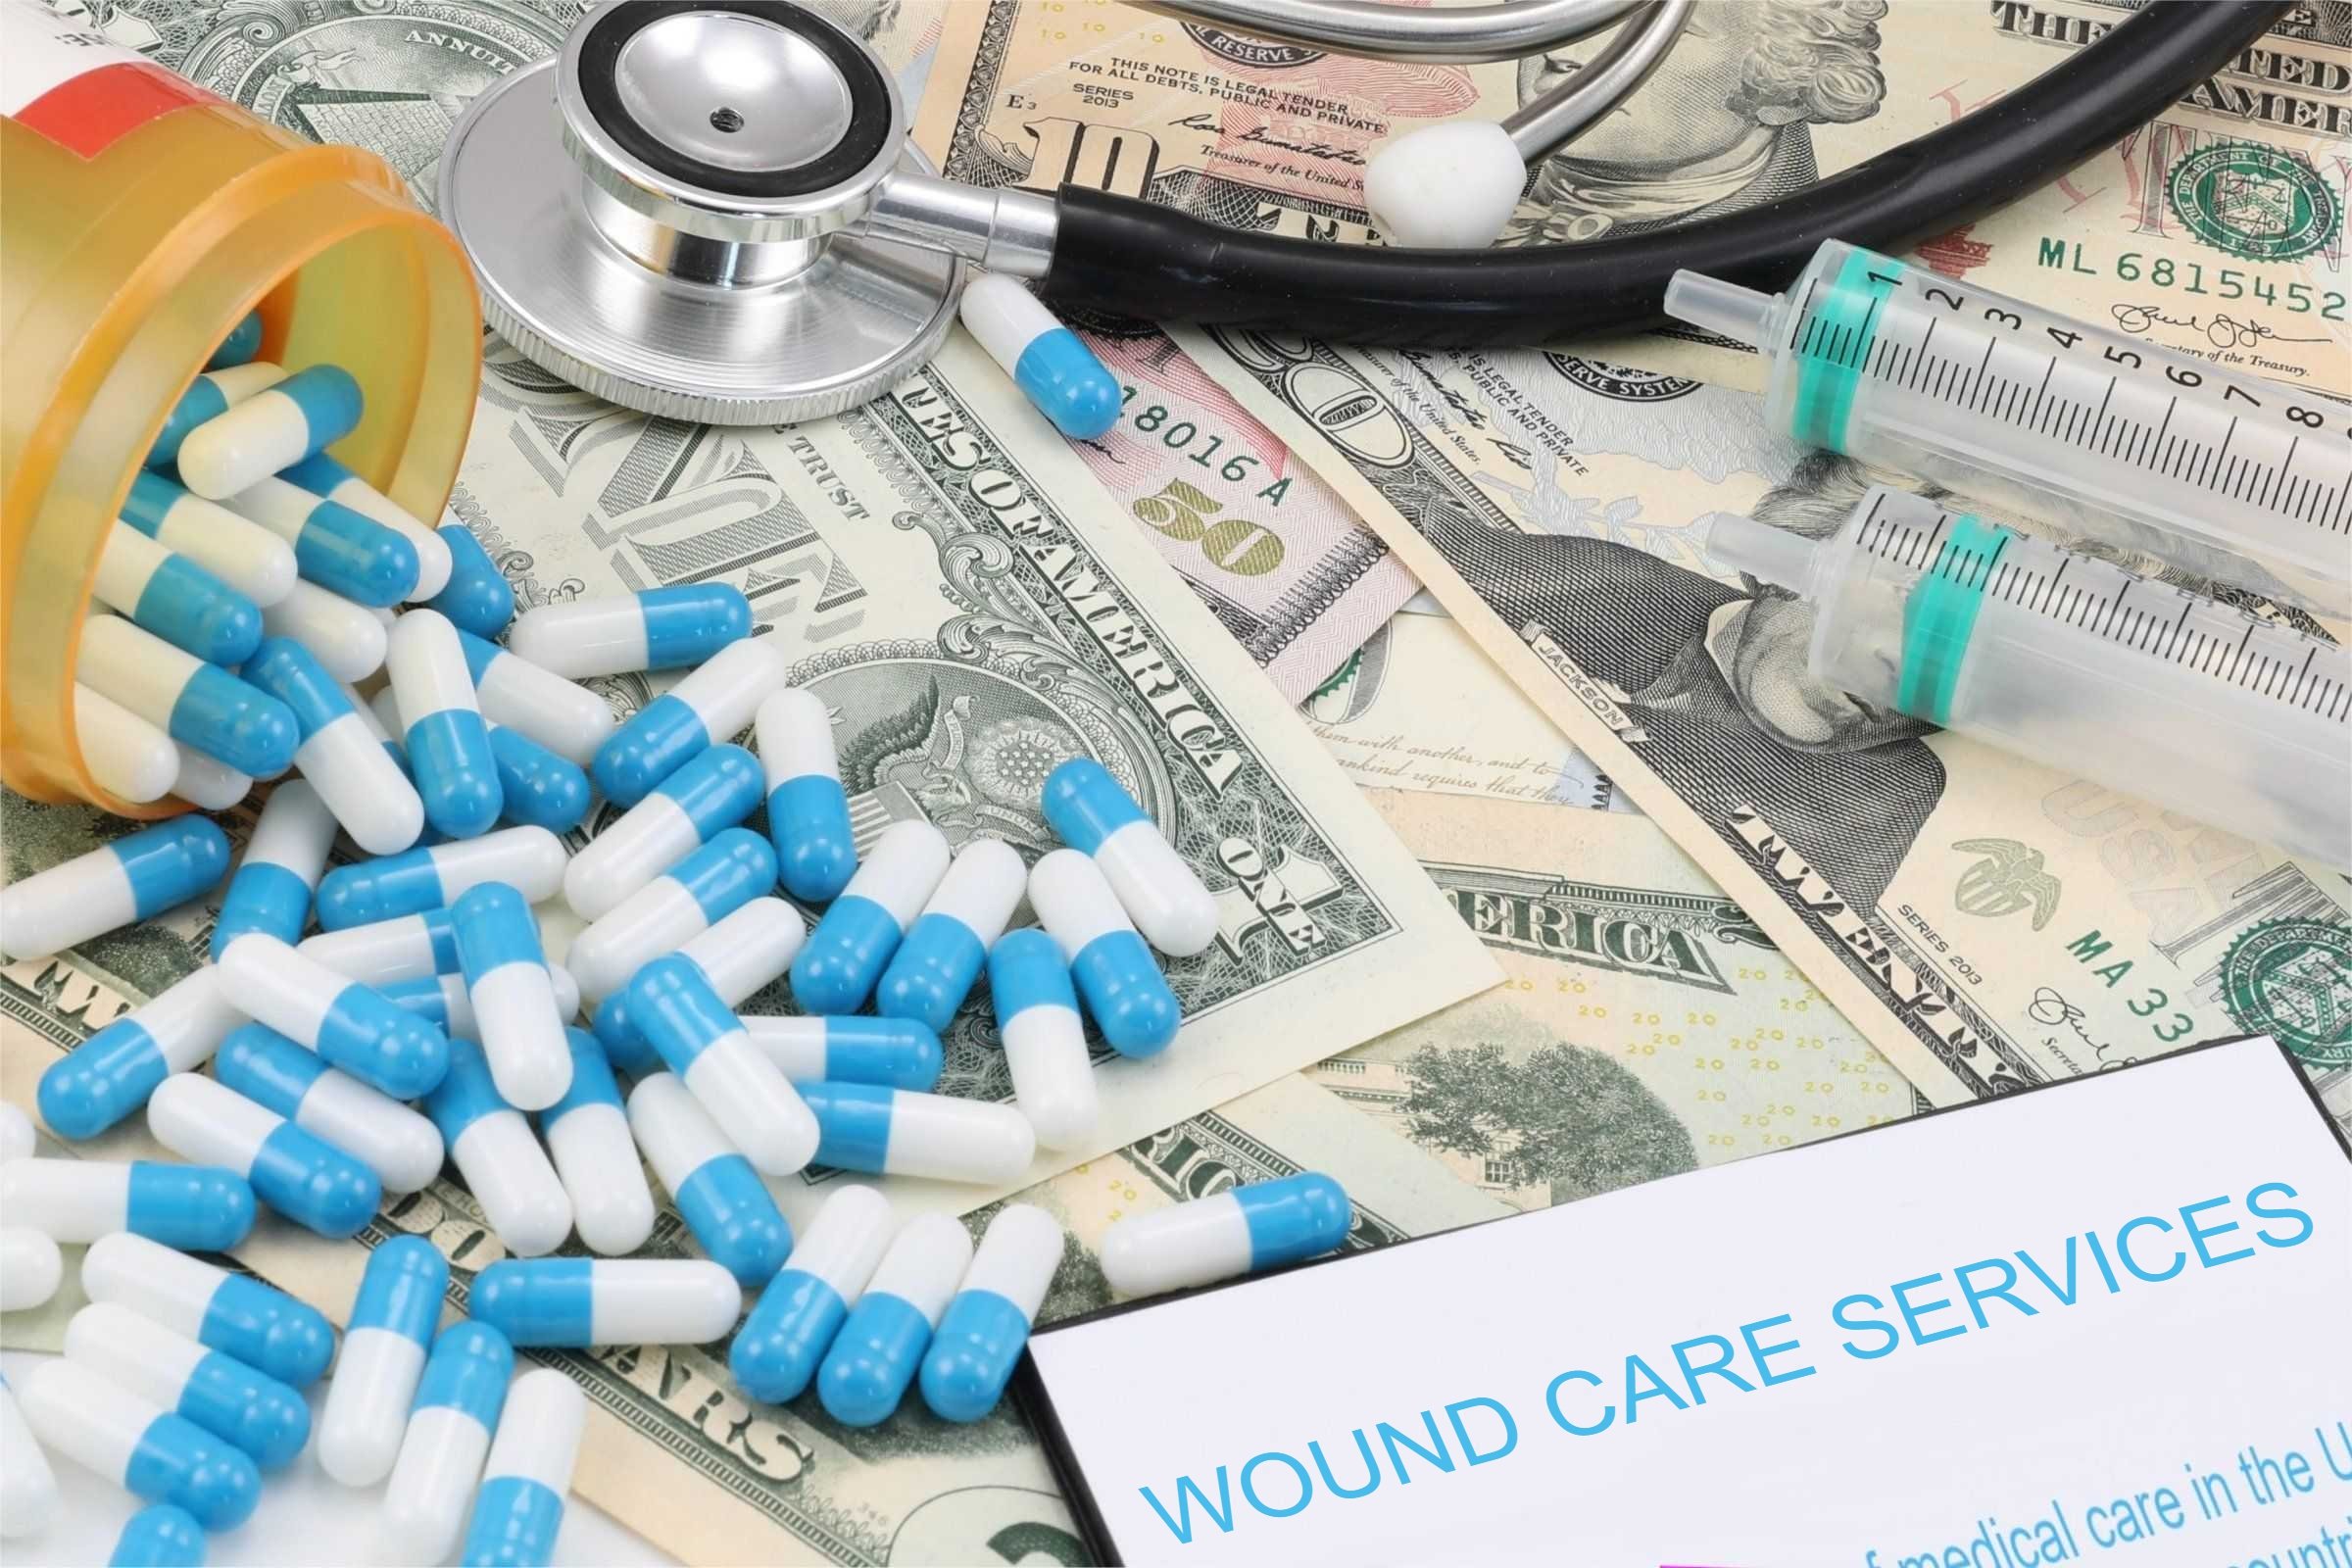 wound care services